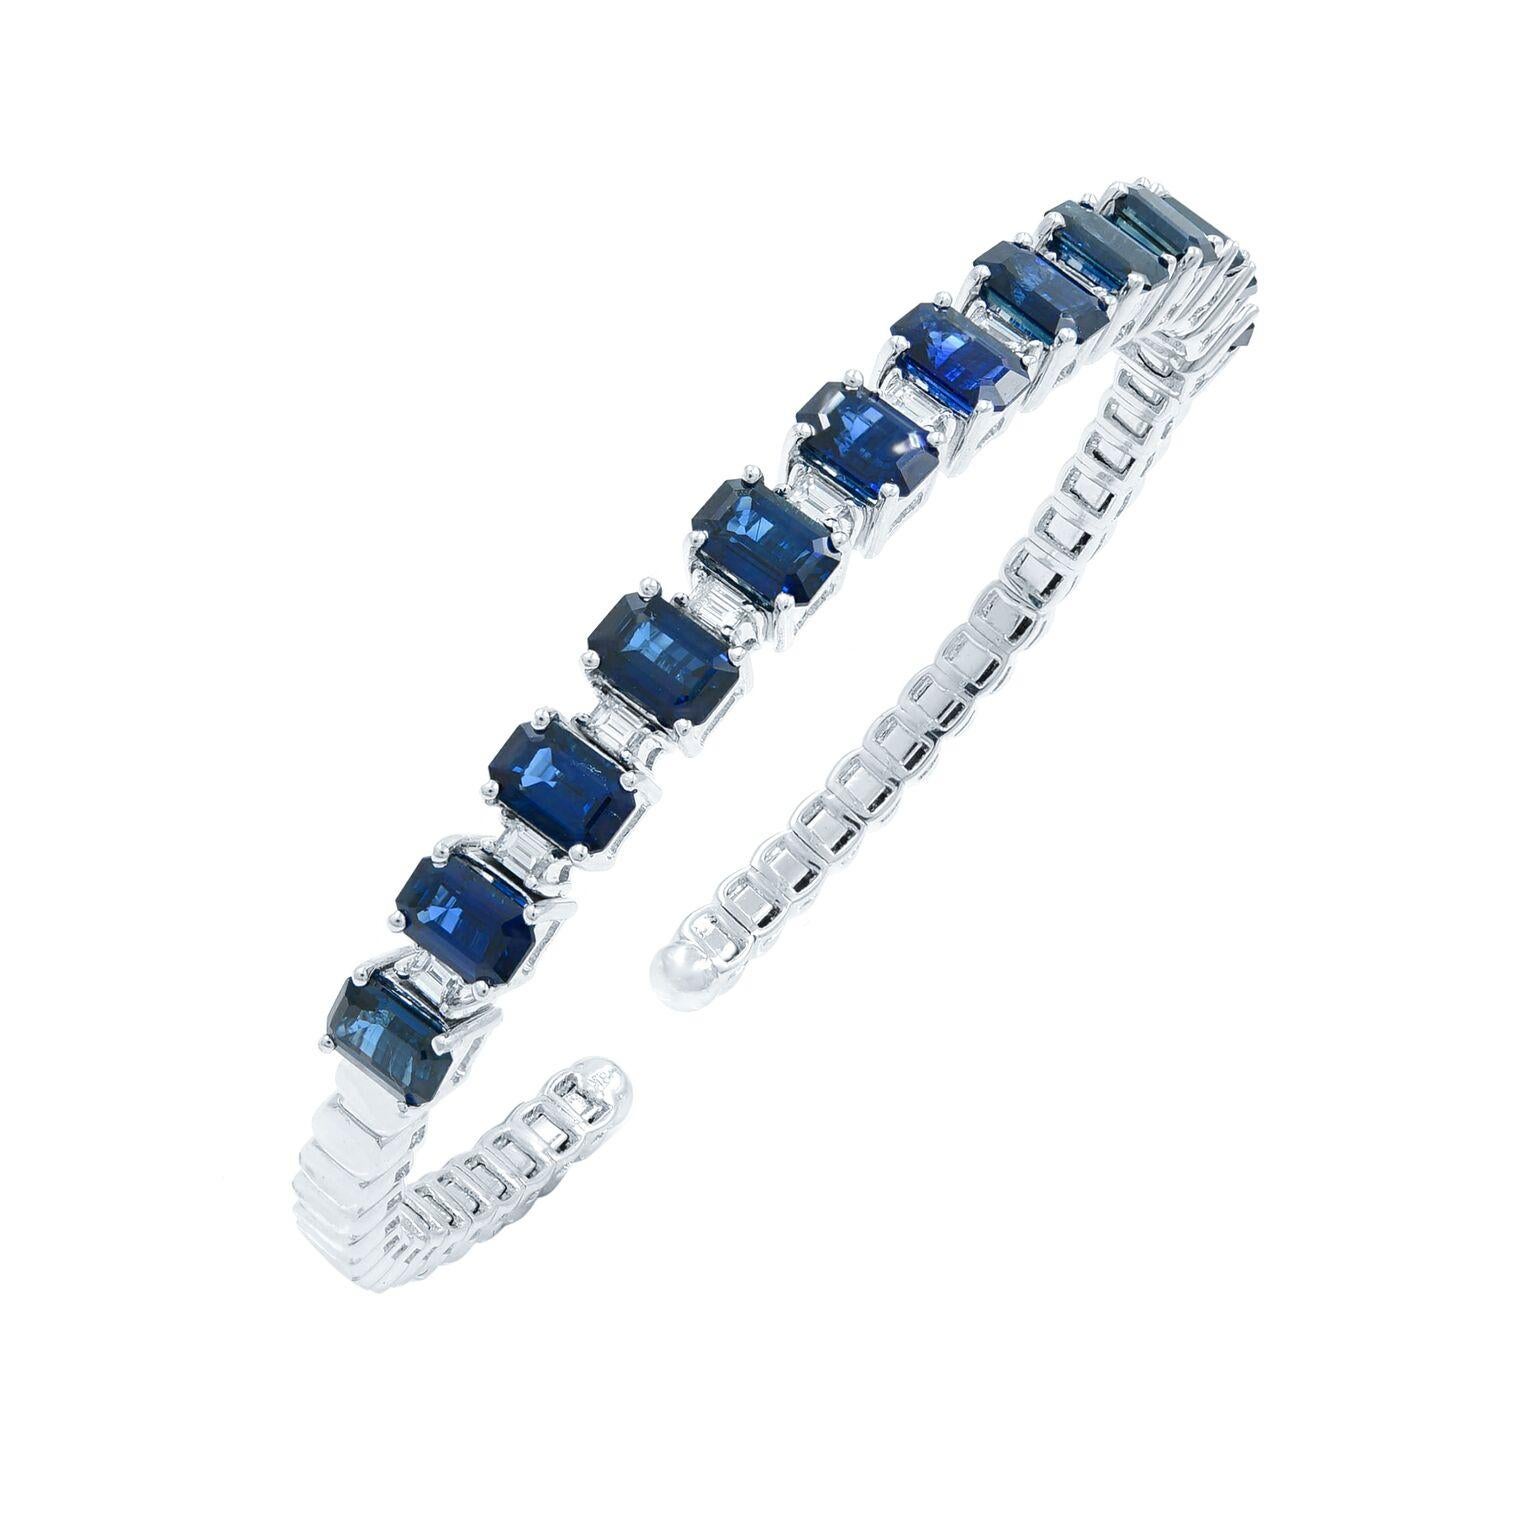 This stunning and exemplary bangle bracelet is crafted in 18K white gold. Starring prong set radiant rich blue emerald cut sapphires weighing 10.20 carats and baguette cut diamonds weighing 1.20 carats. Length: 7.25 inches. Width: 3.7mm. Total